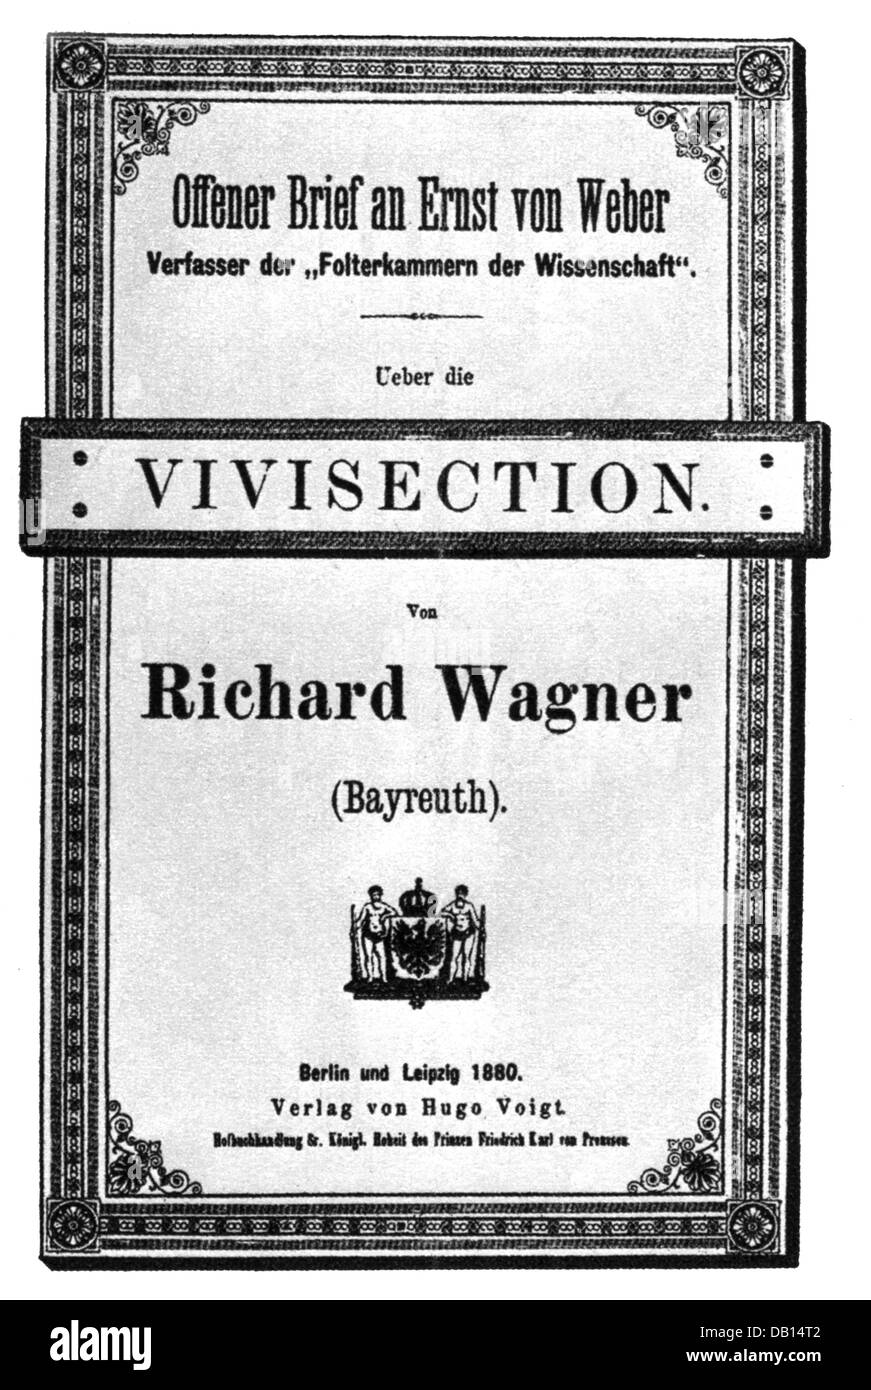 Wagner, Richard, 22.5.1813 - 13.2.1883, German composer, open letter, about vivisection, title, Berlin - Leipzig, 1880, Stock Photo